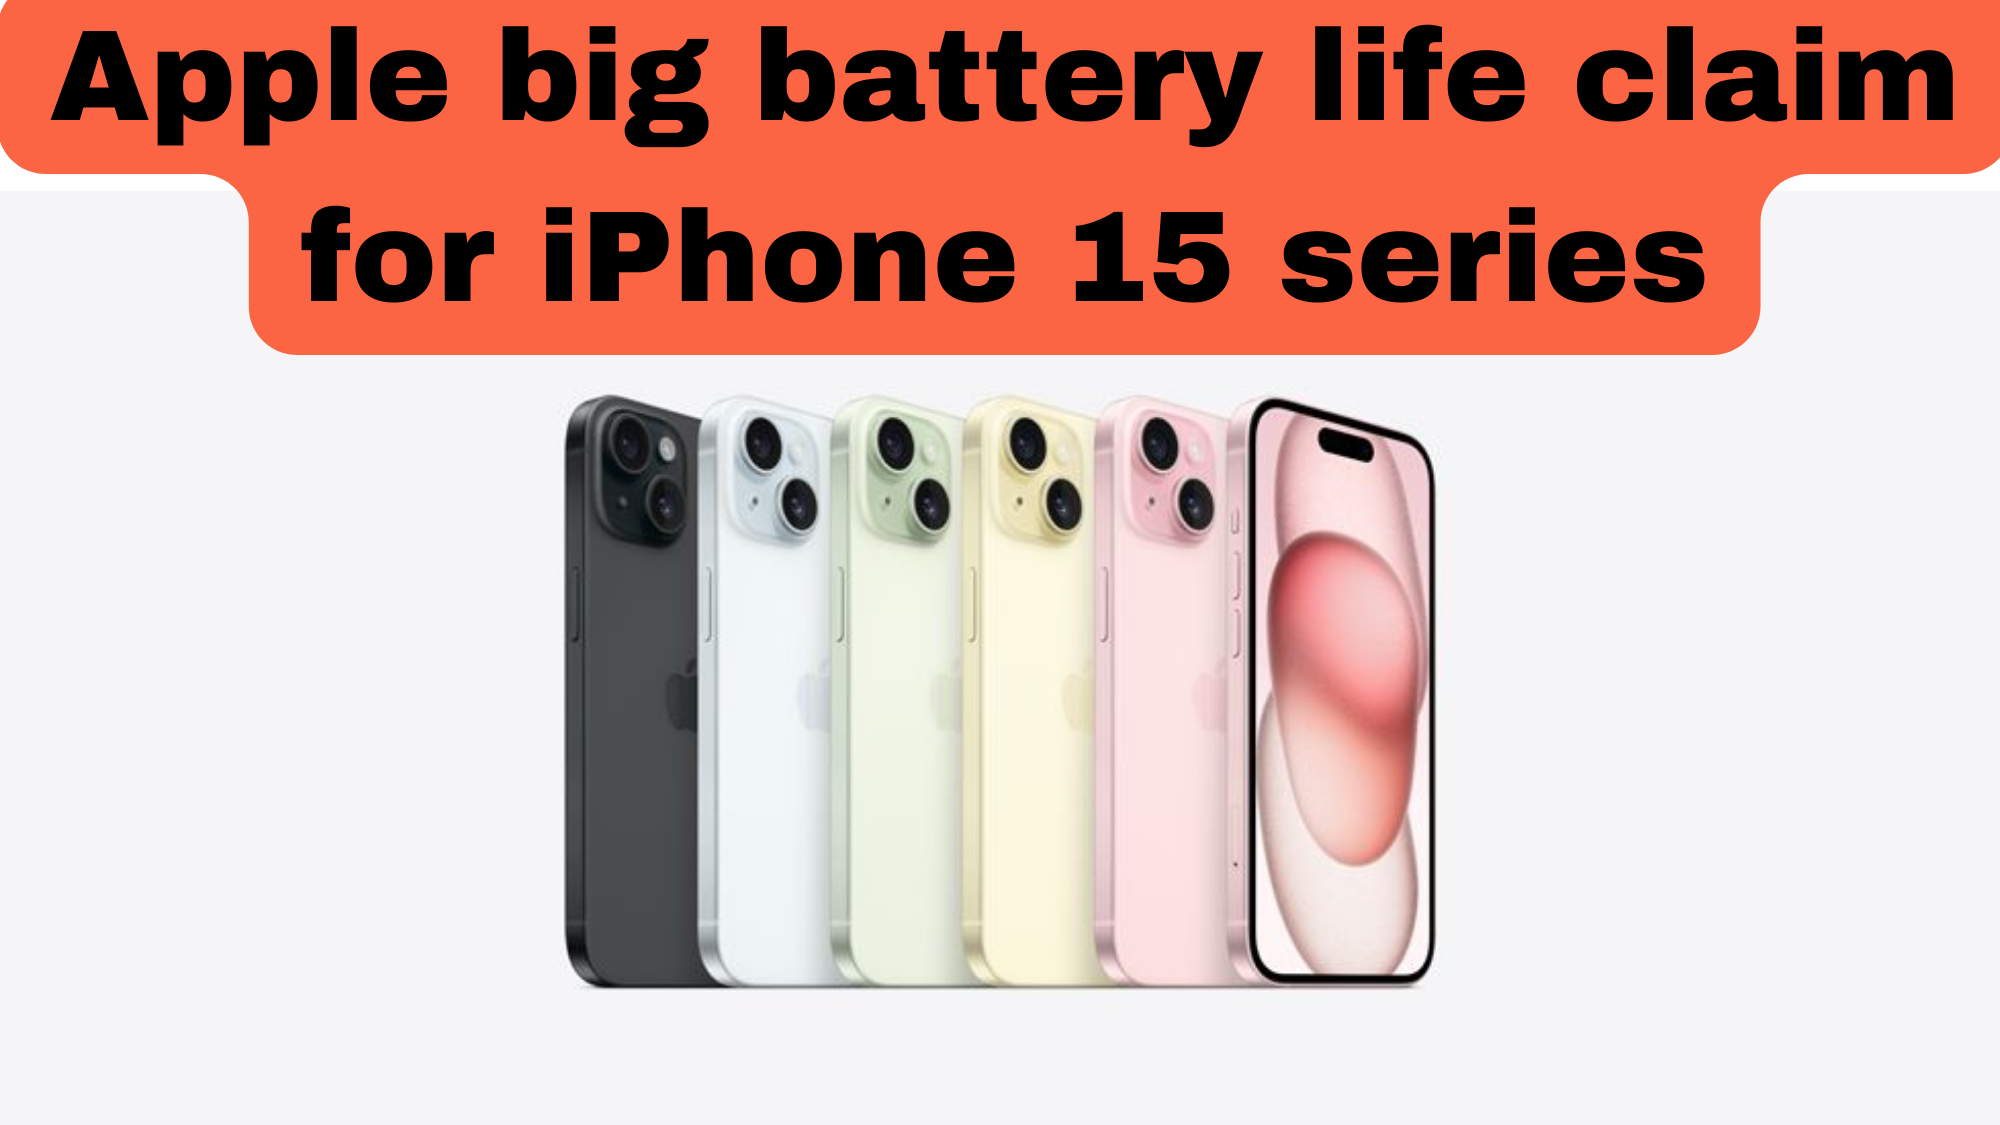 Apple big battery life claim for iPhone 15 series; check what is that?